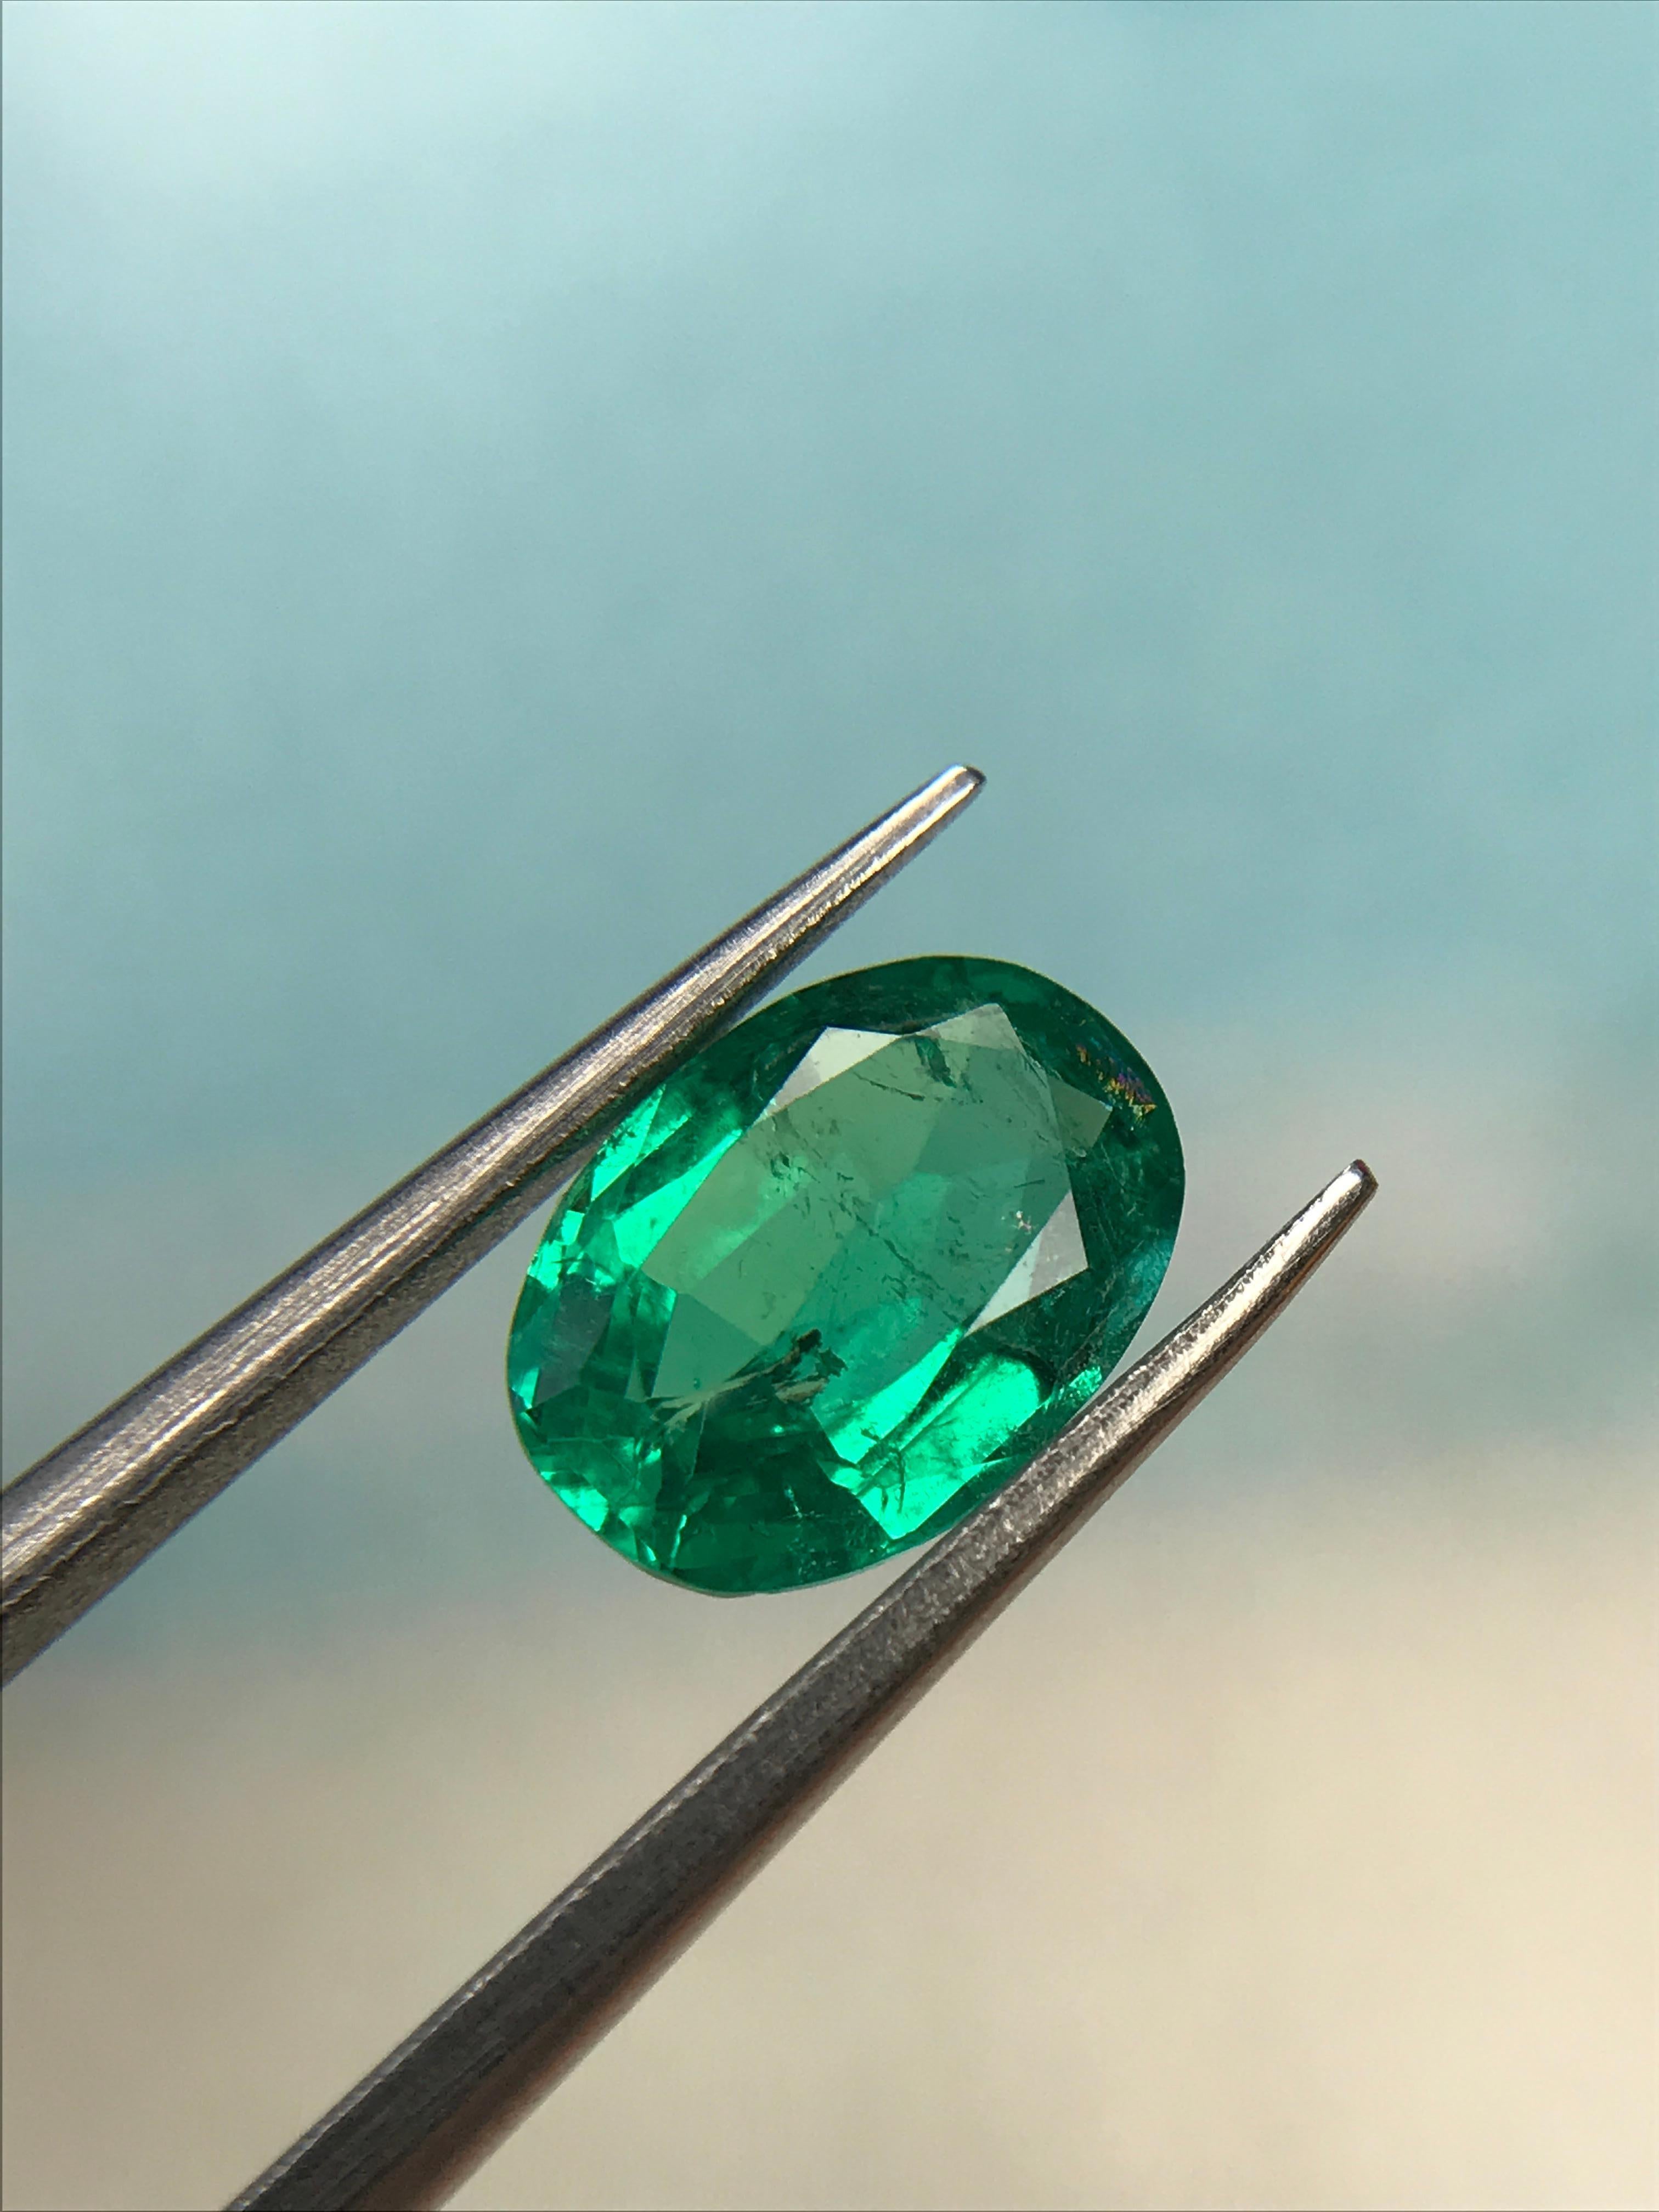 Dazzling 1.19 carat natural oval emerald with moderate oil treatment. This beautiful stone would be the perfect fit for a lovely ring or pendant to add a splash of colour to your life.

We specialise in colour gemstones and offer a bespoke jewellery